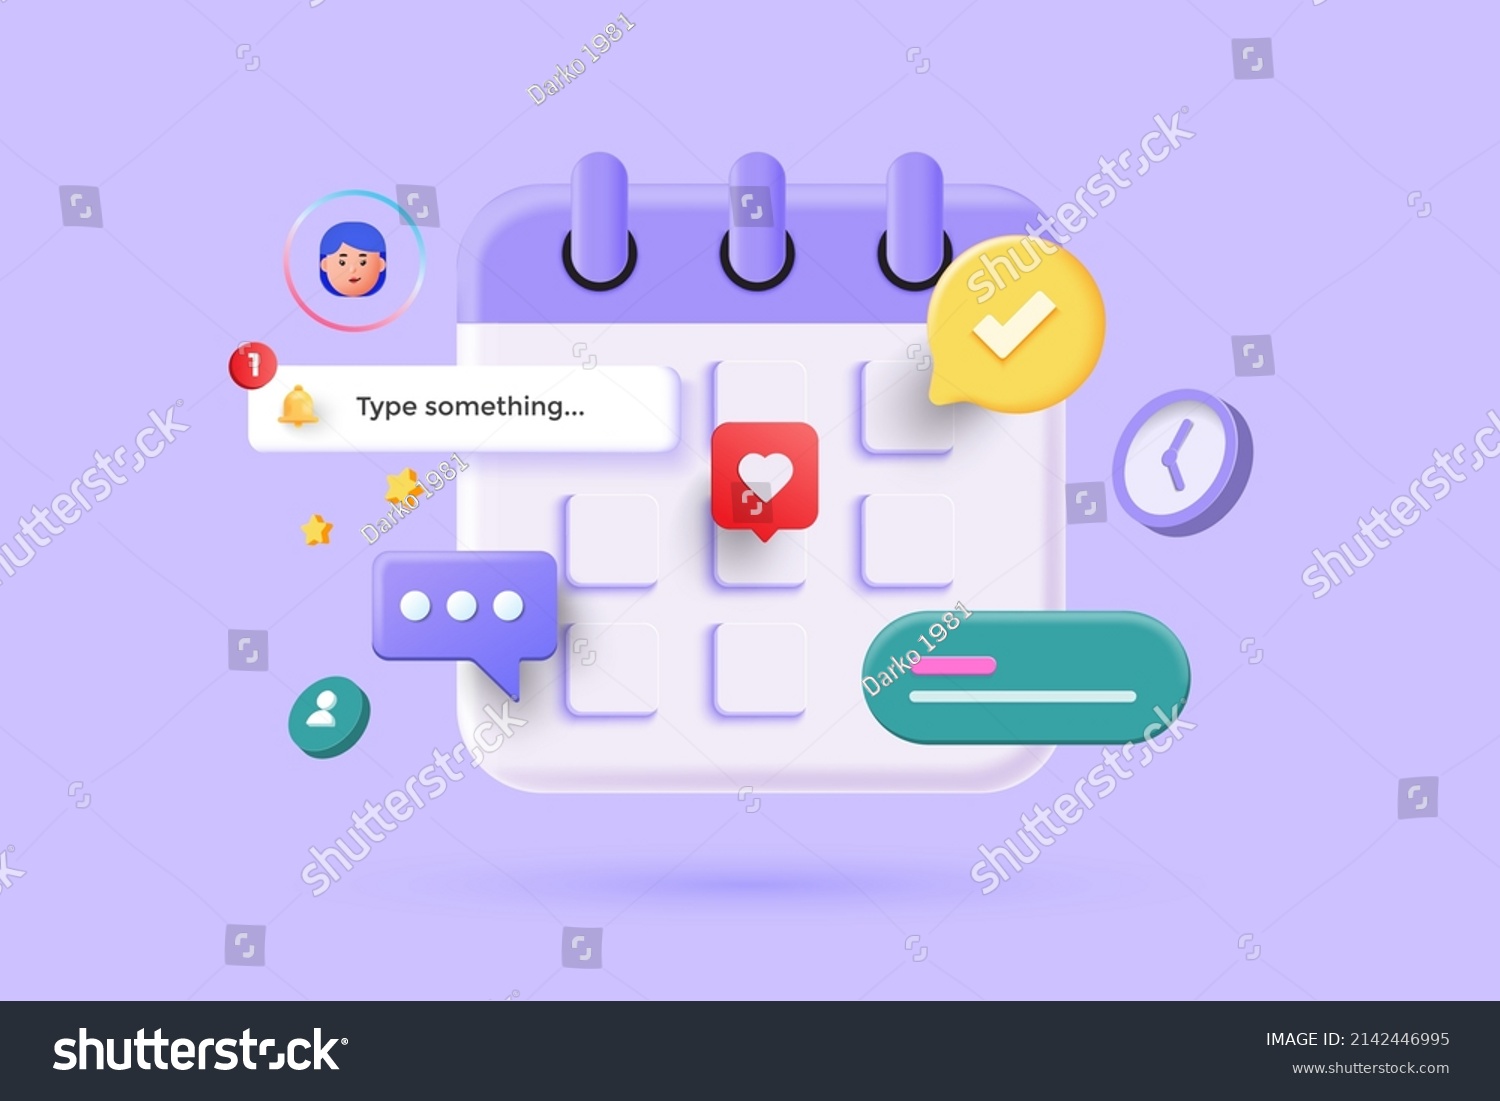 SVG of Calendar icon symbol and related icons in minimal cartoon style design. Day month year time concept. on purple background. Vector 3d illustration svg